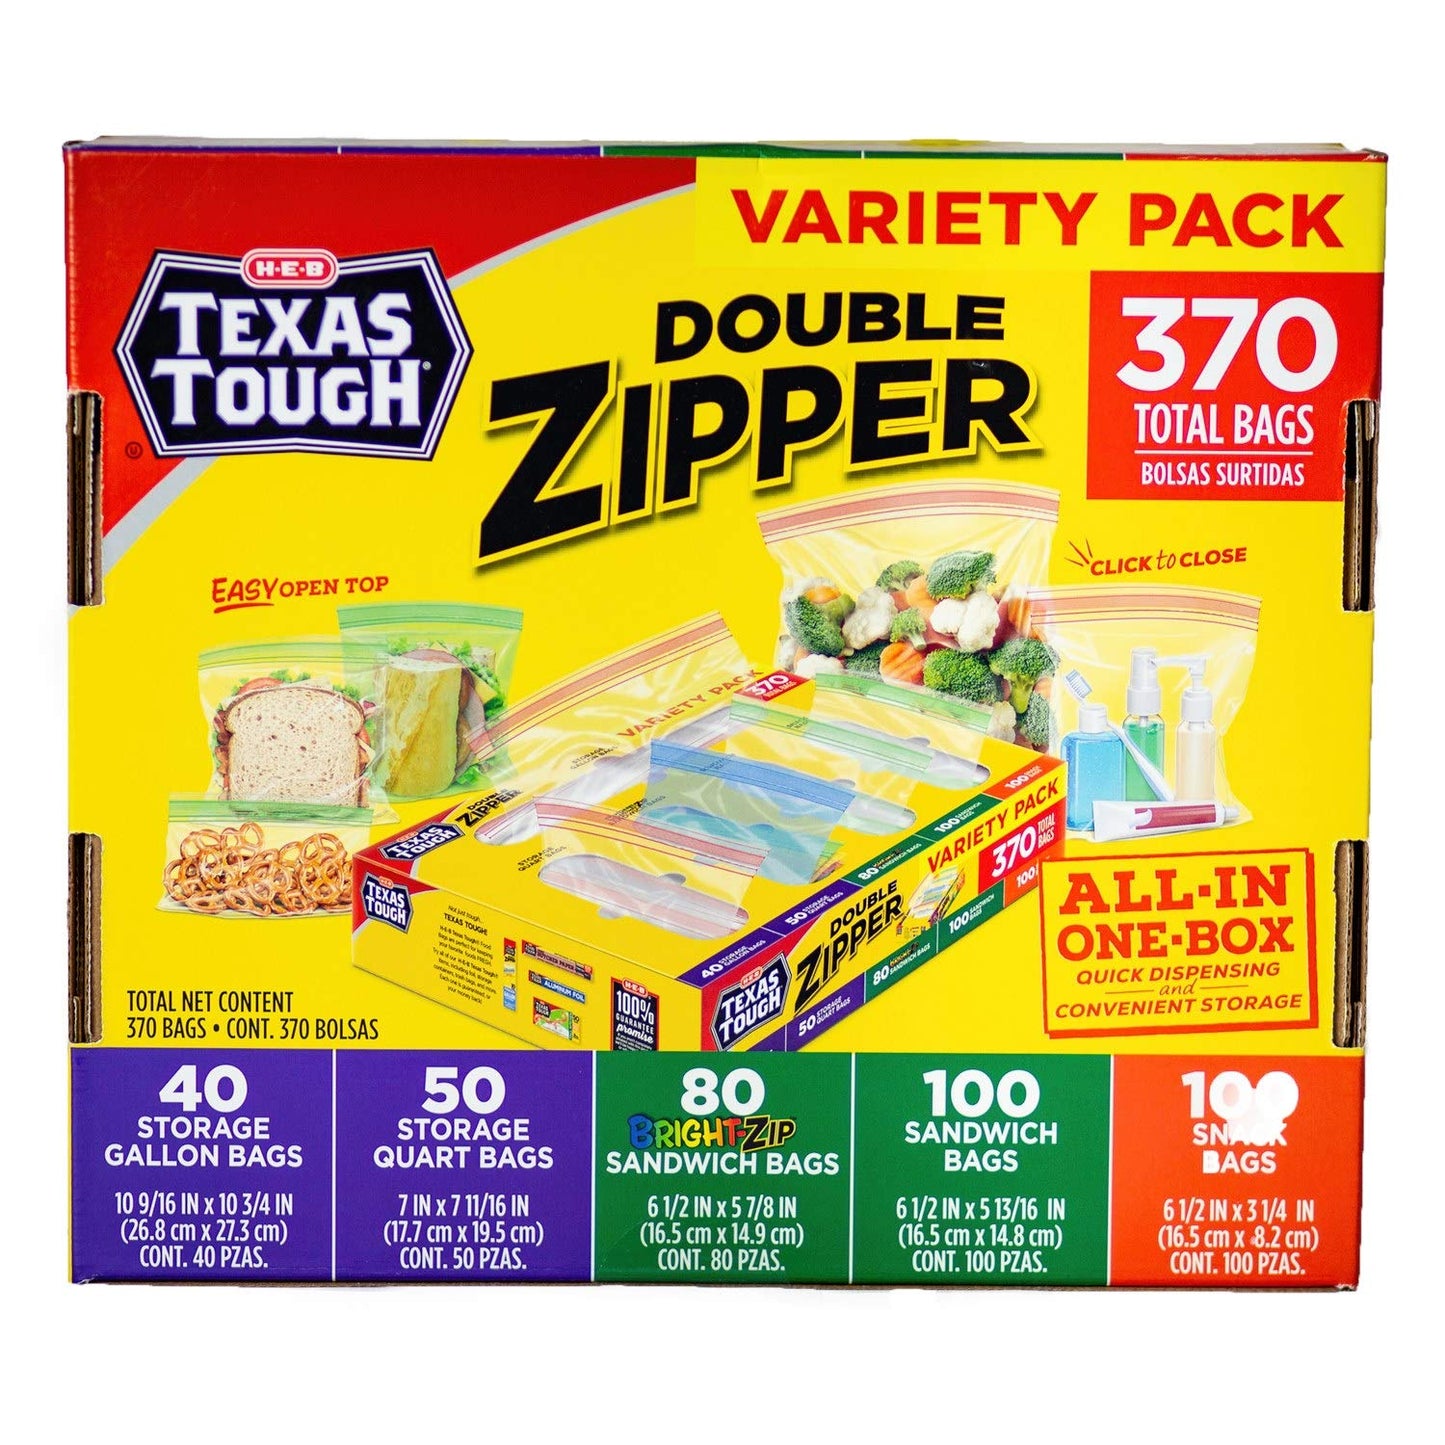 Texas Tough All-In-One Box 370 total bags